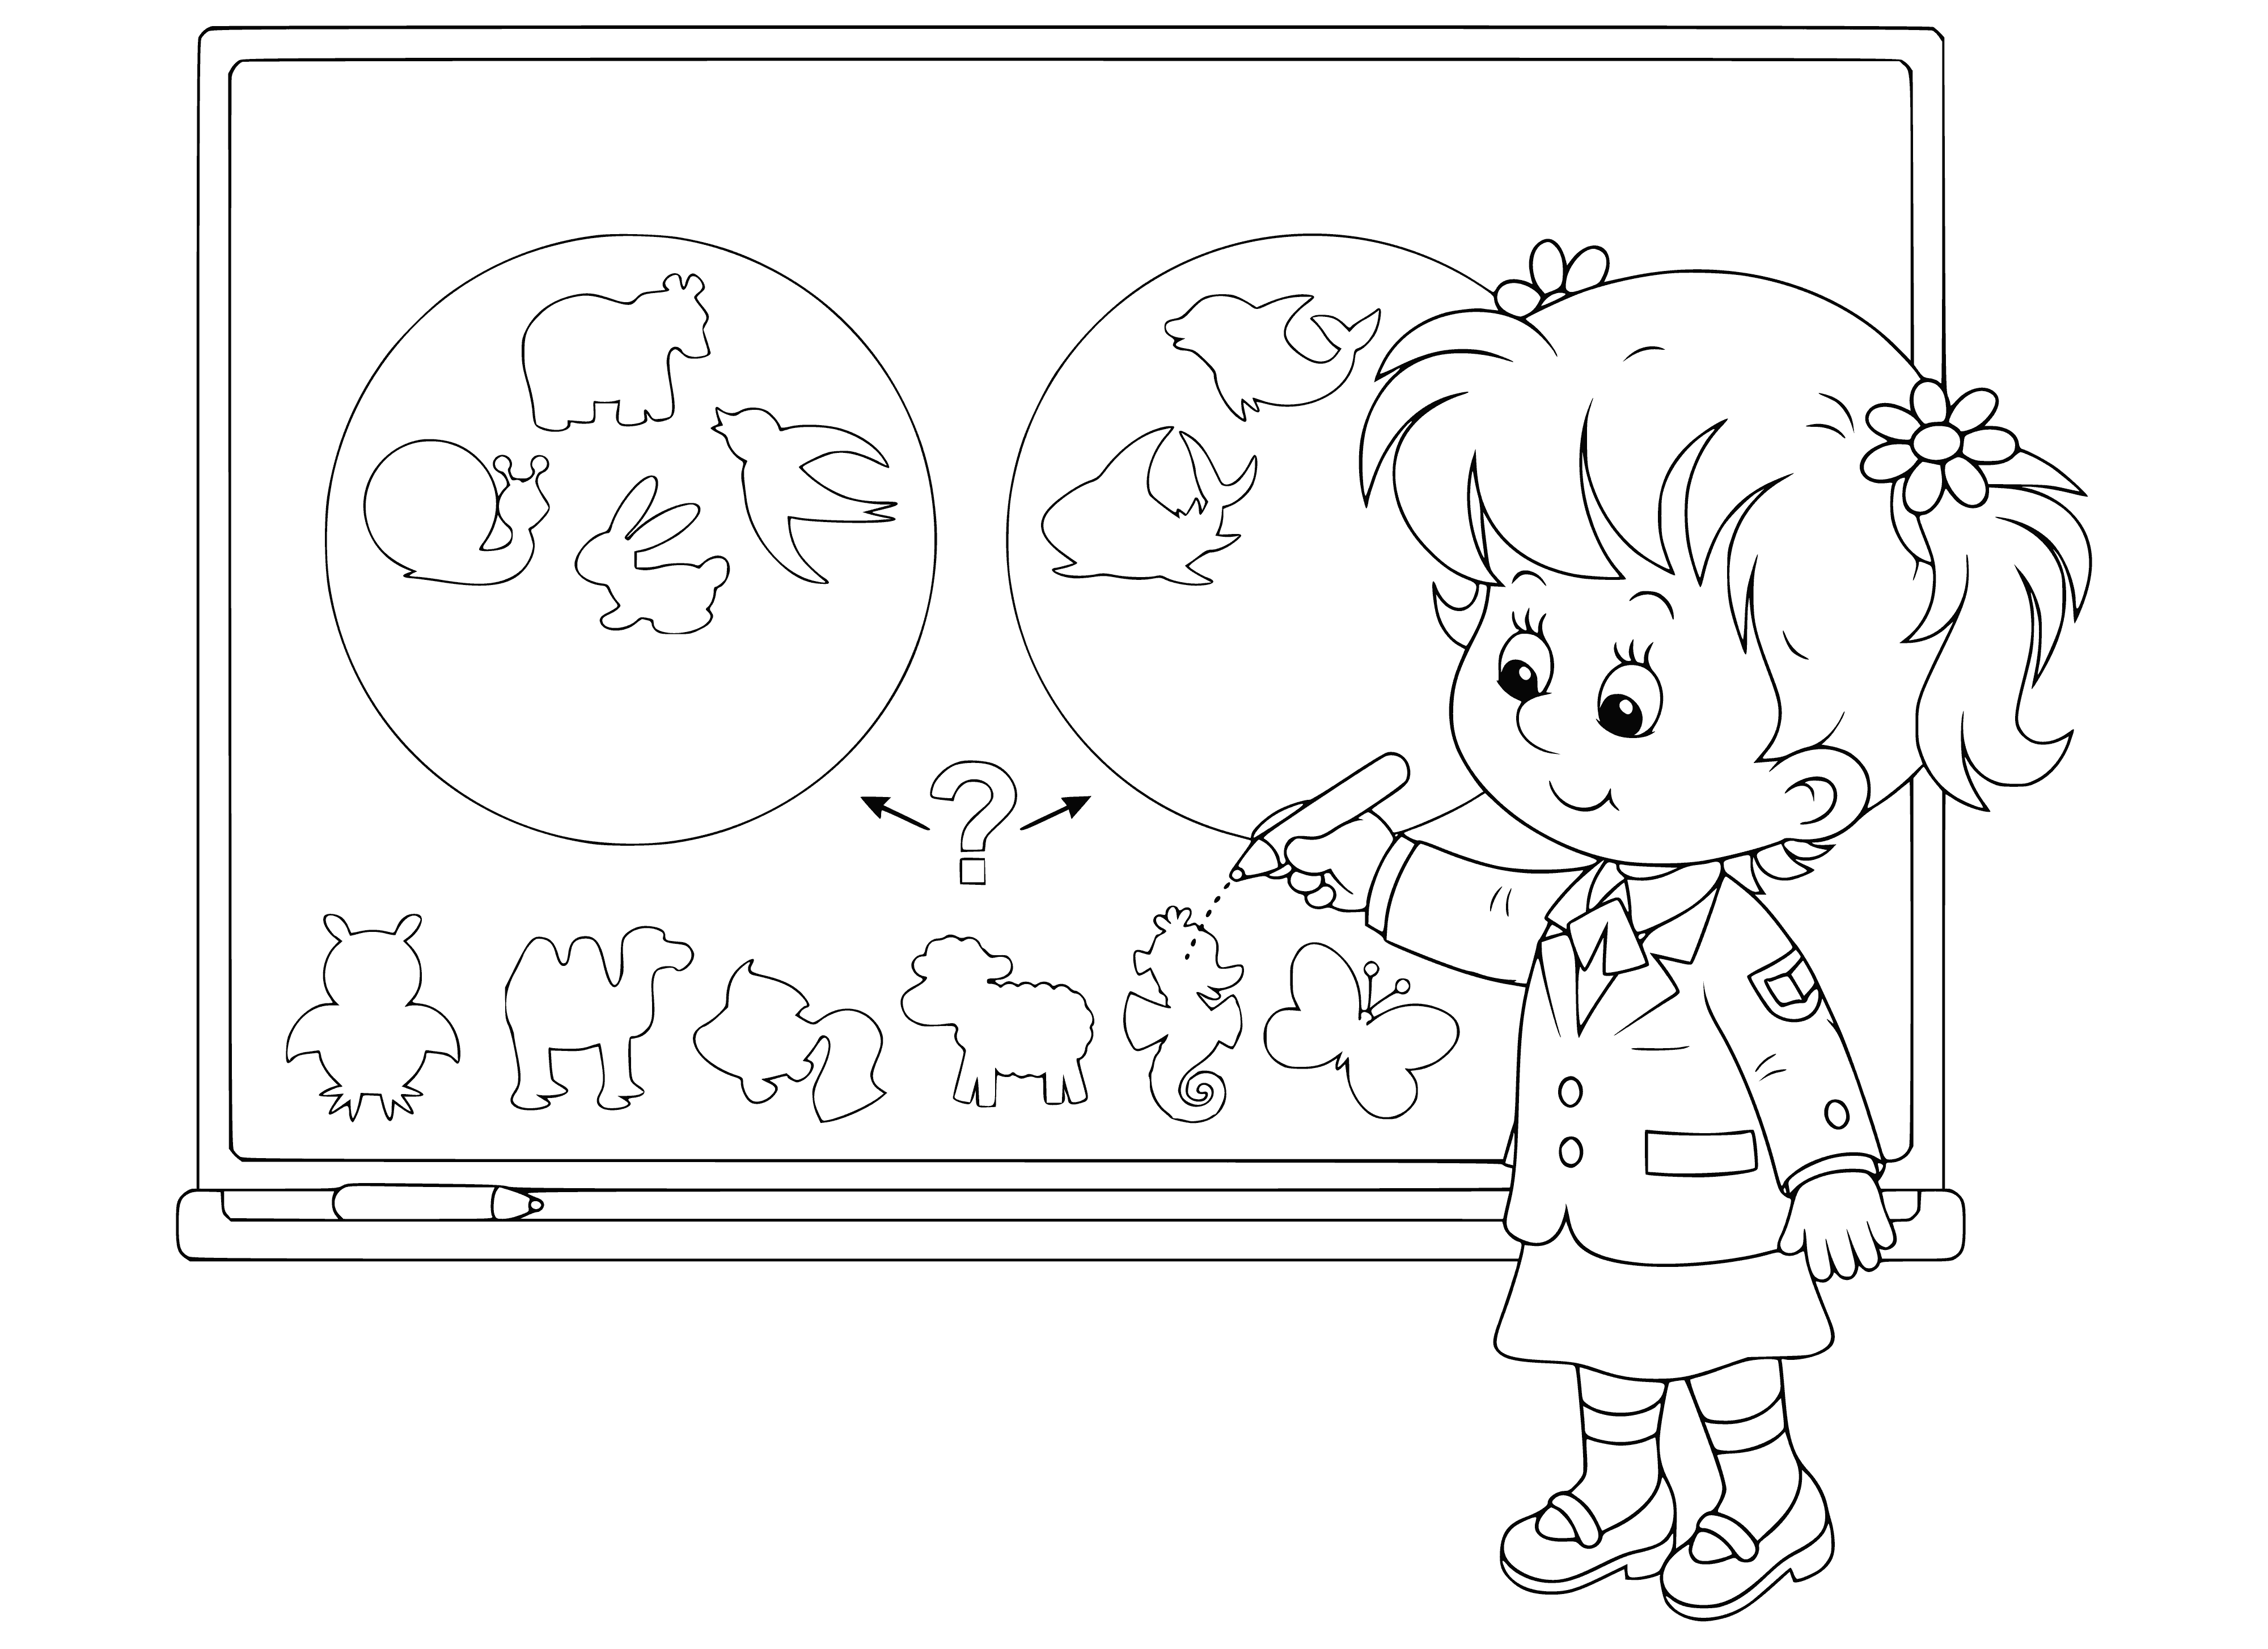 The girl answers in the lesson coloring page